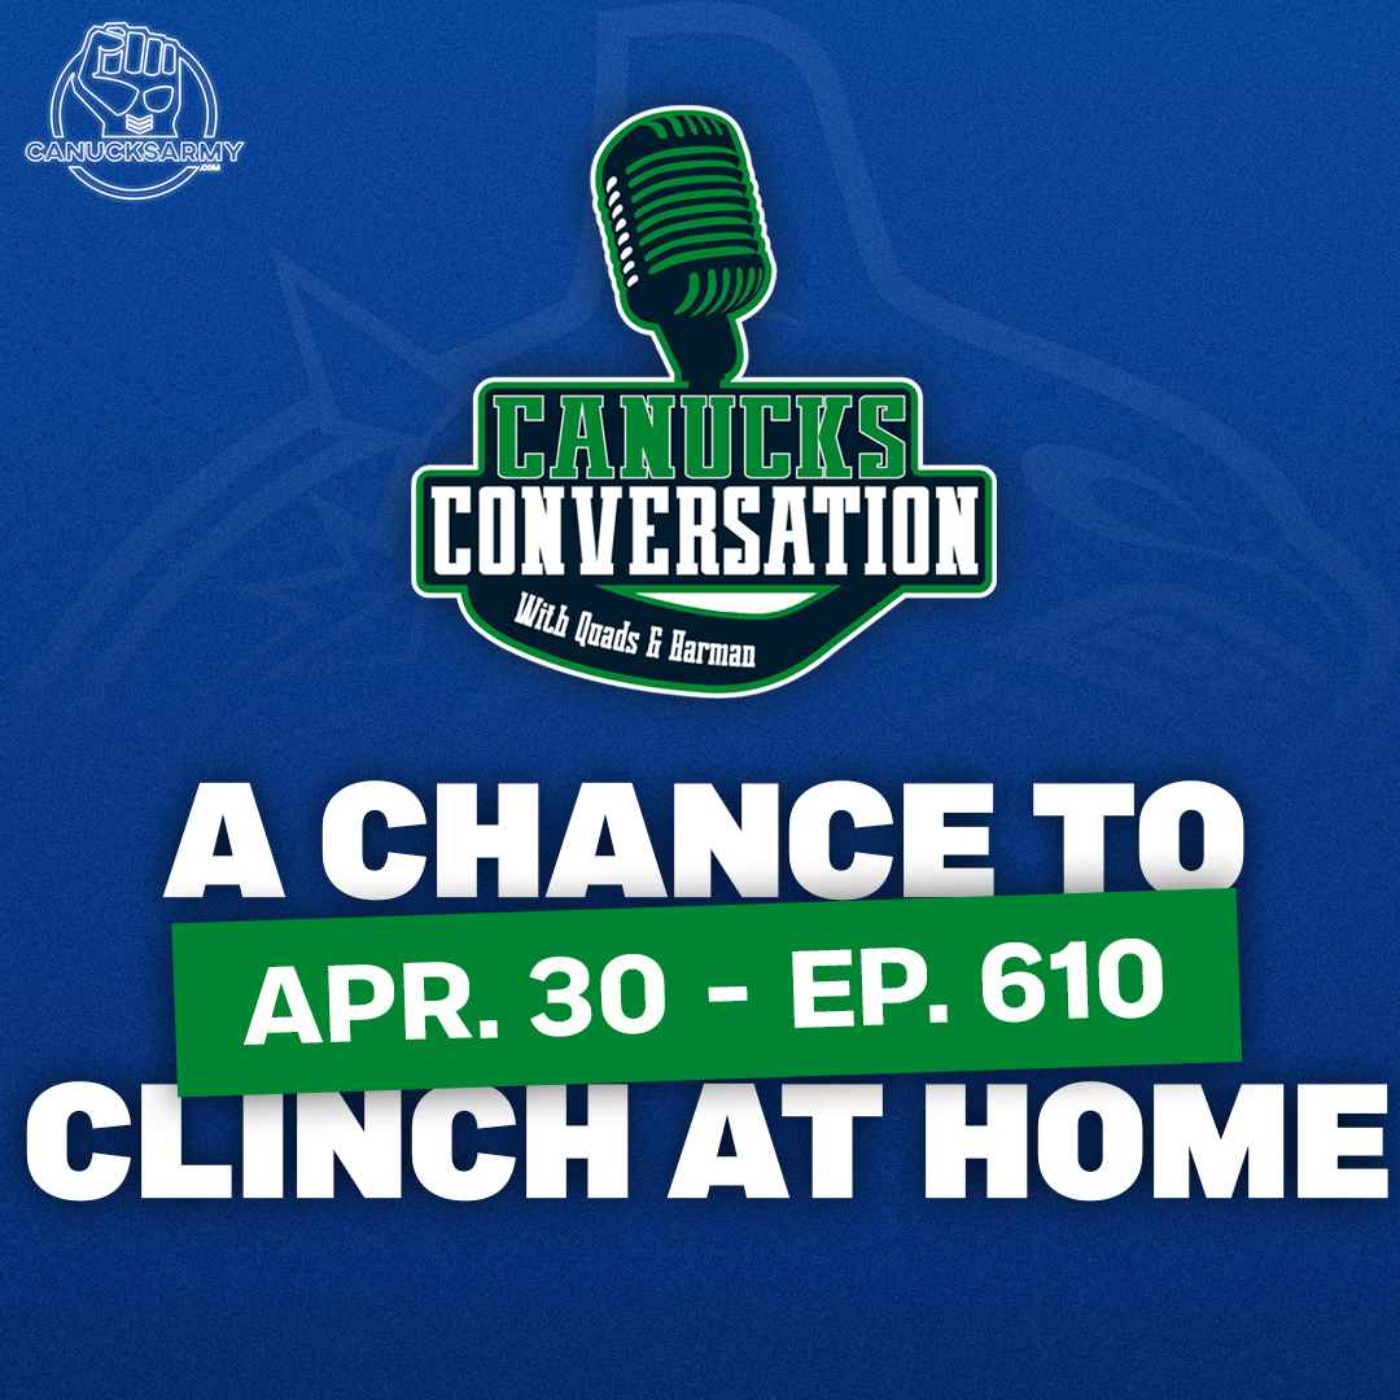 April 30: Canucks roll into Rogers Arena with a chance to advance ft. Jeff Paterson (Ep. 610)